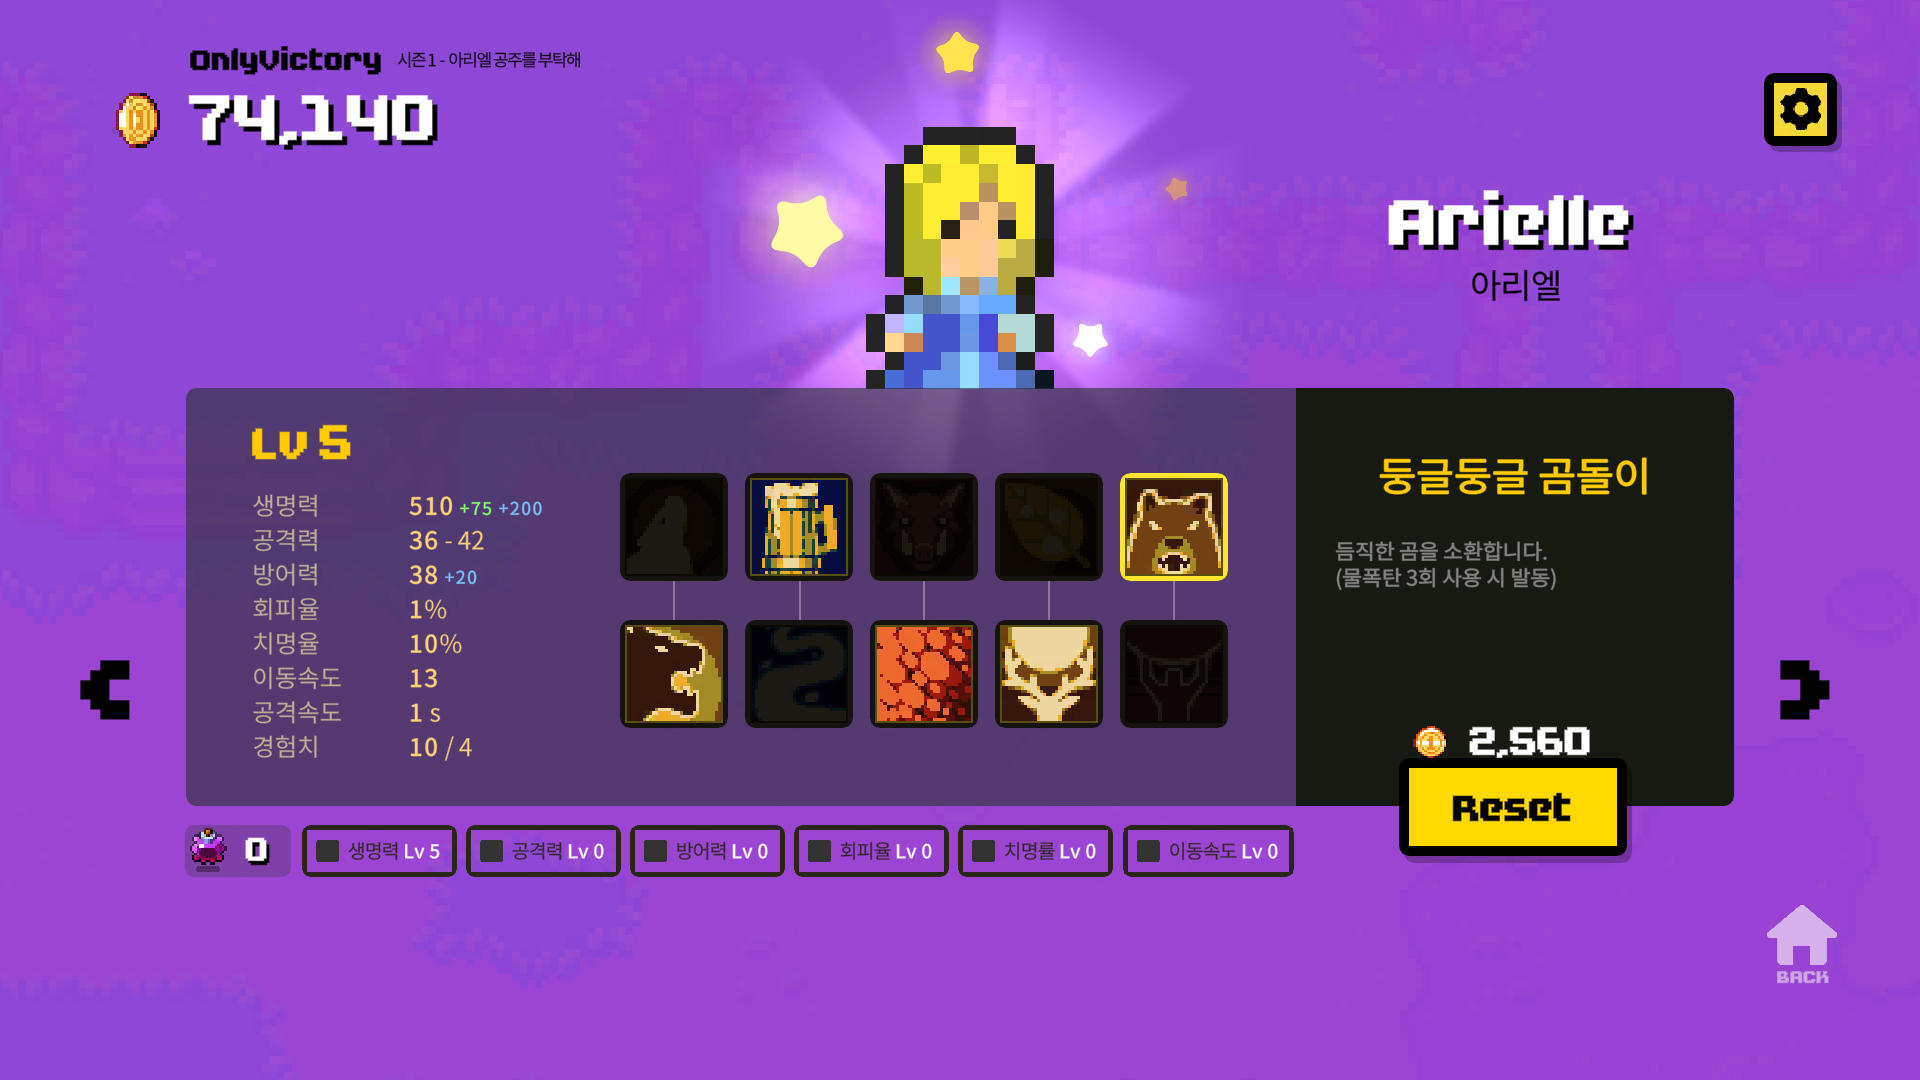 Screenshot of OnlyVictory : Princess Arielle